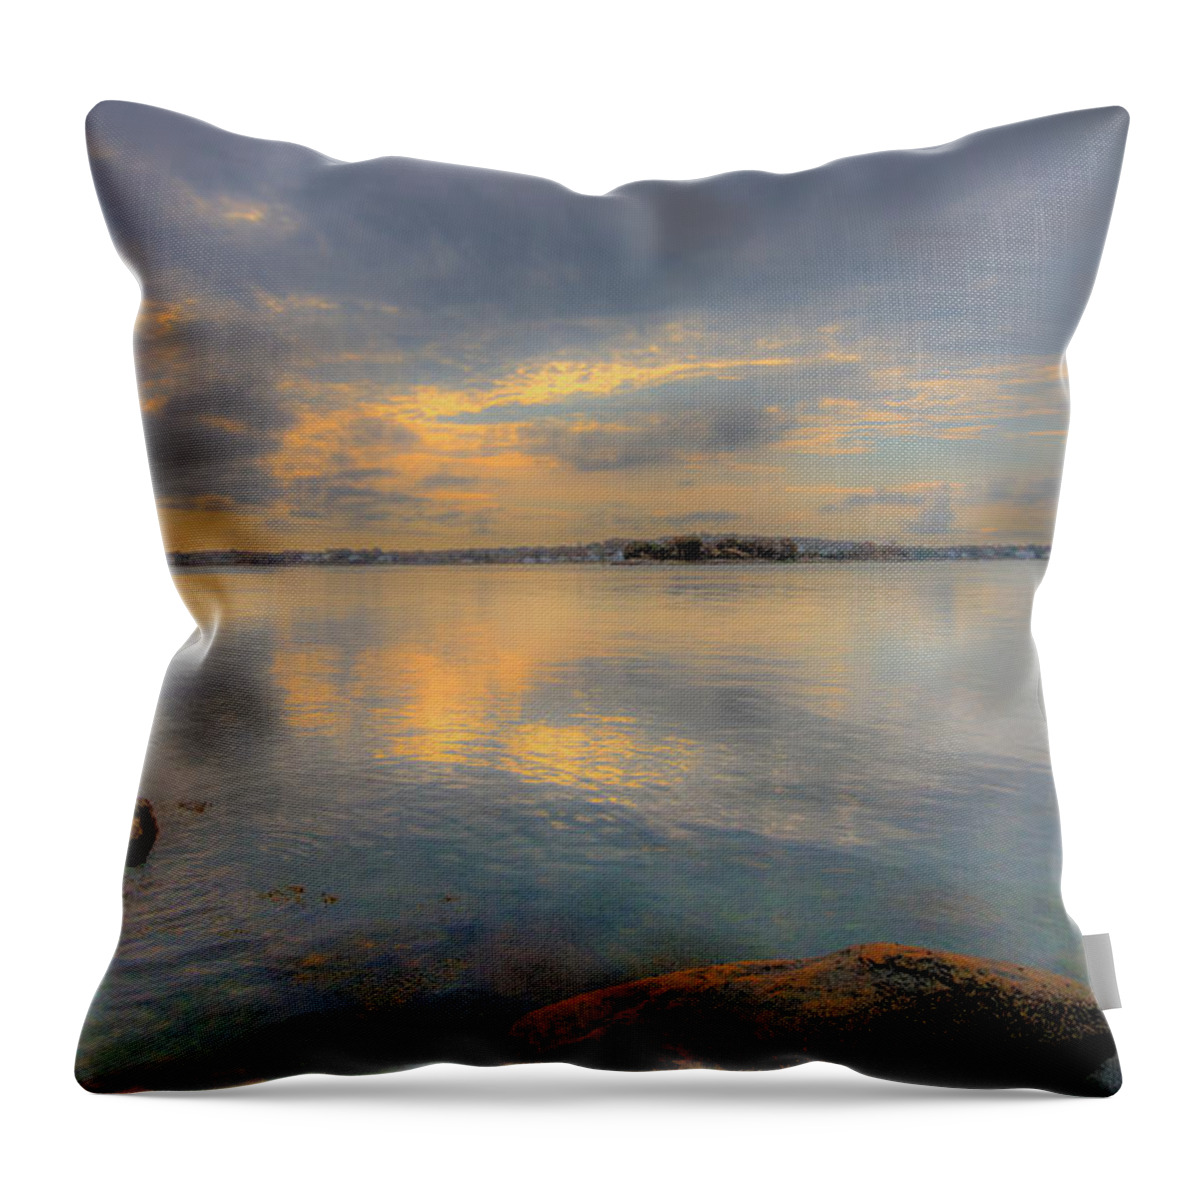  Throw Pillow featuring the photograph Safe Harbor 1 by David Henningsen